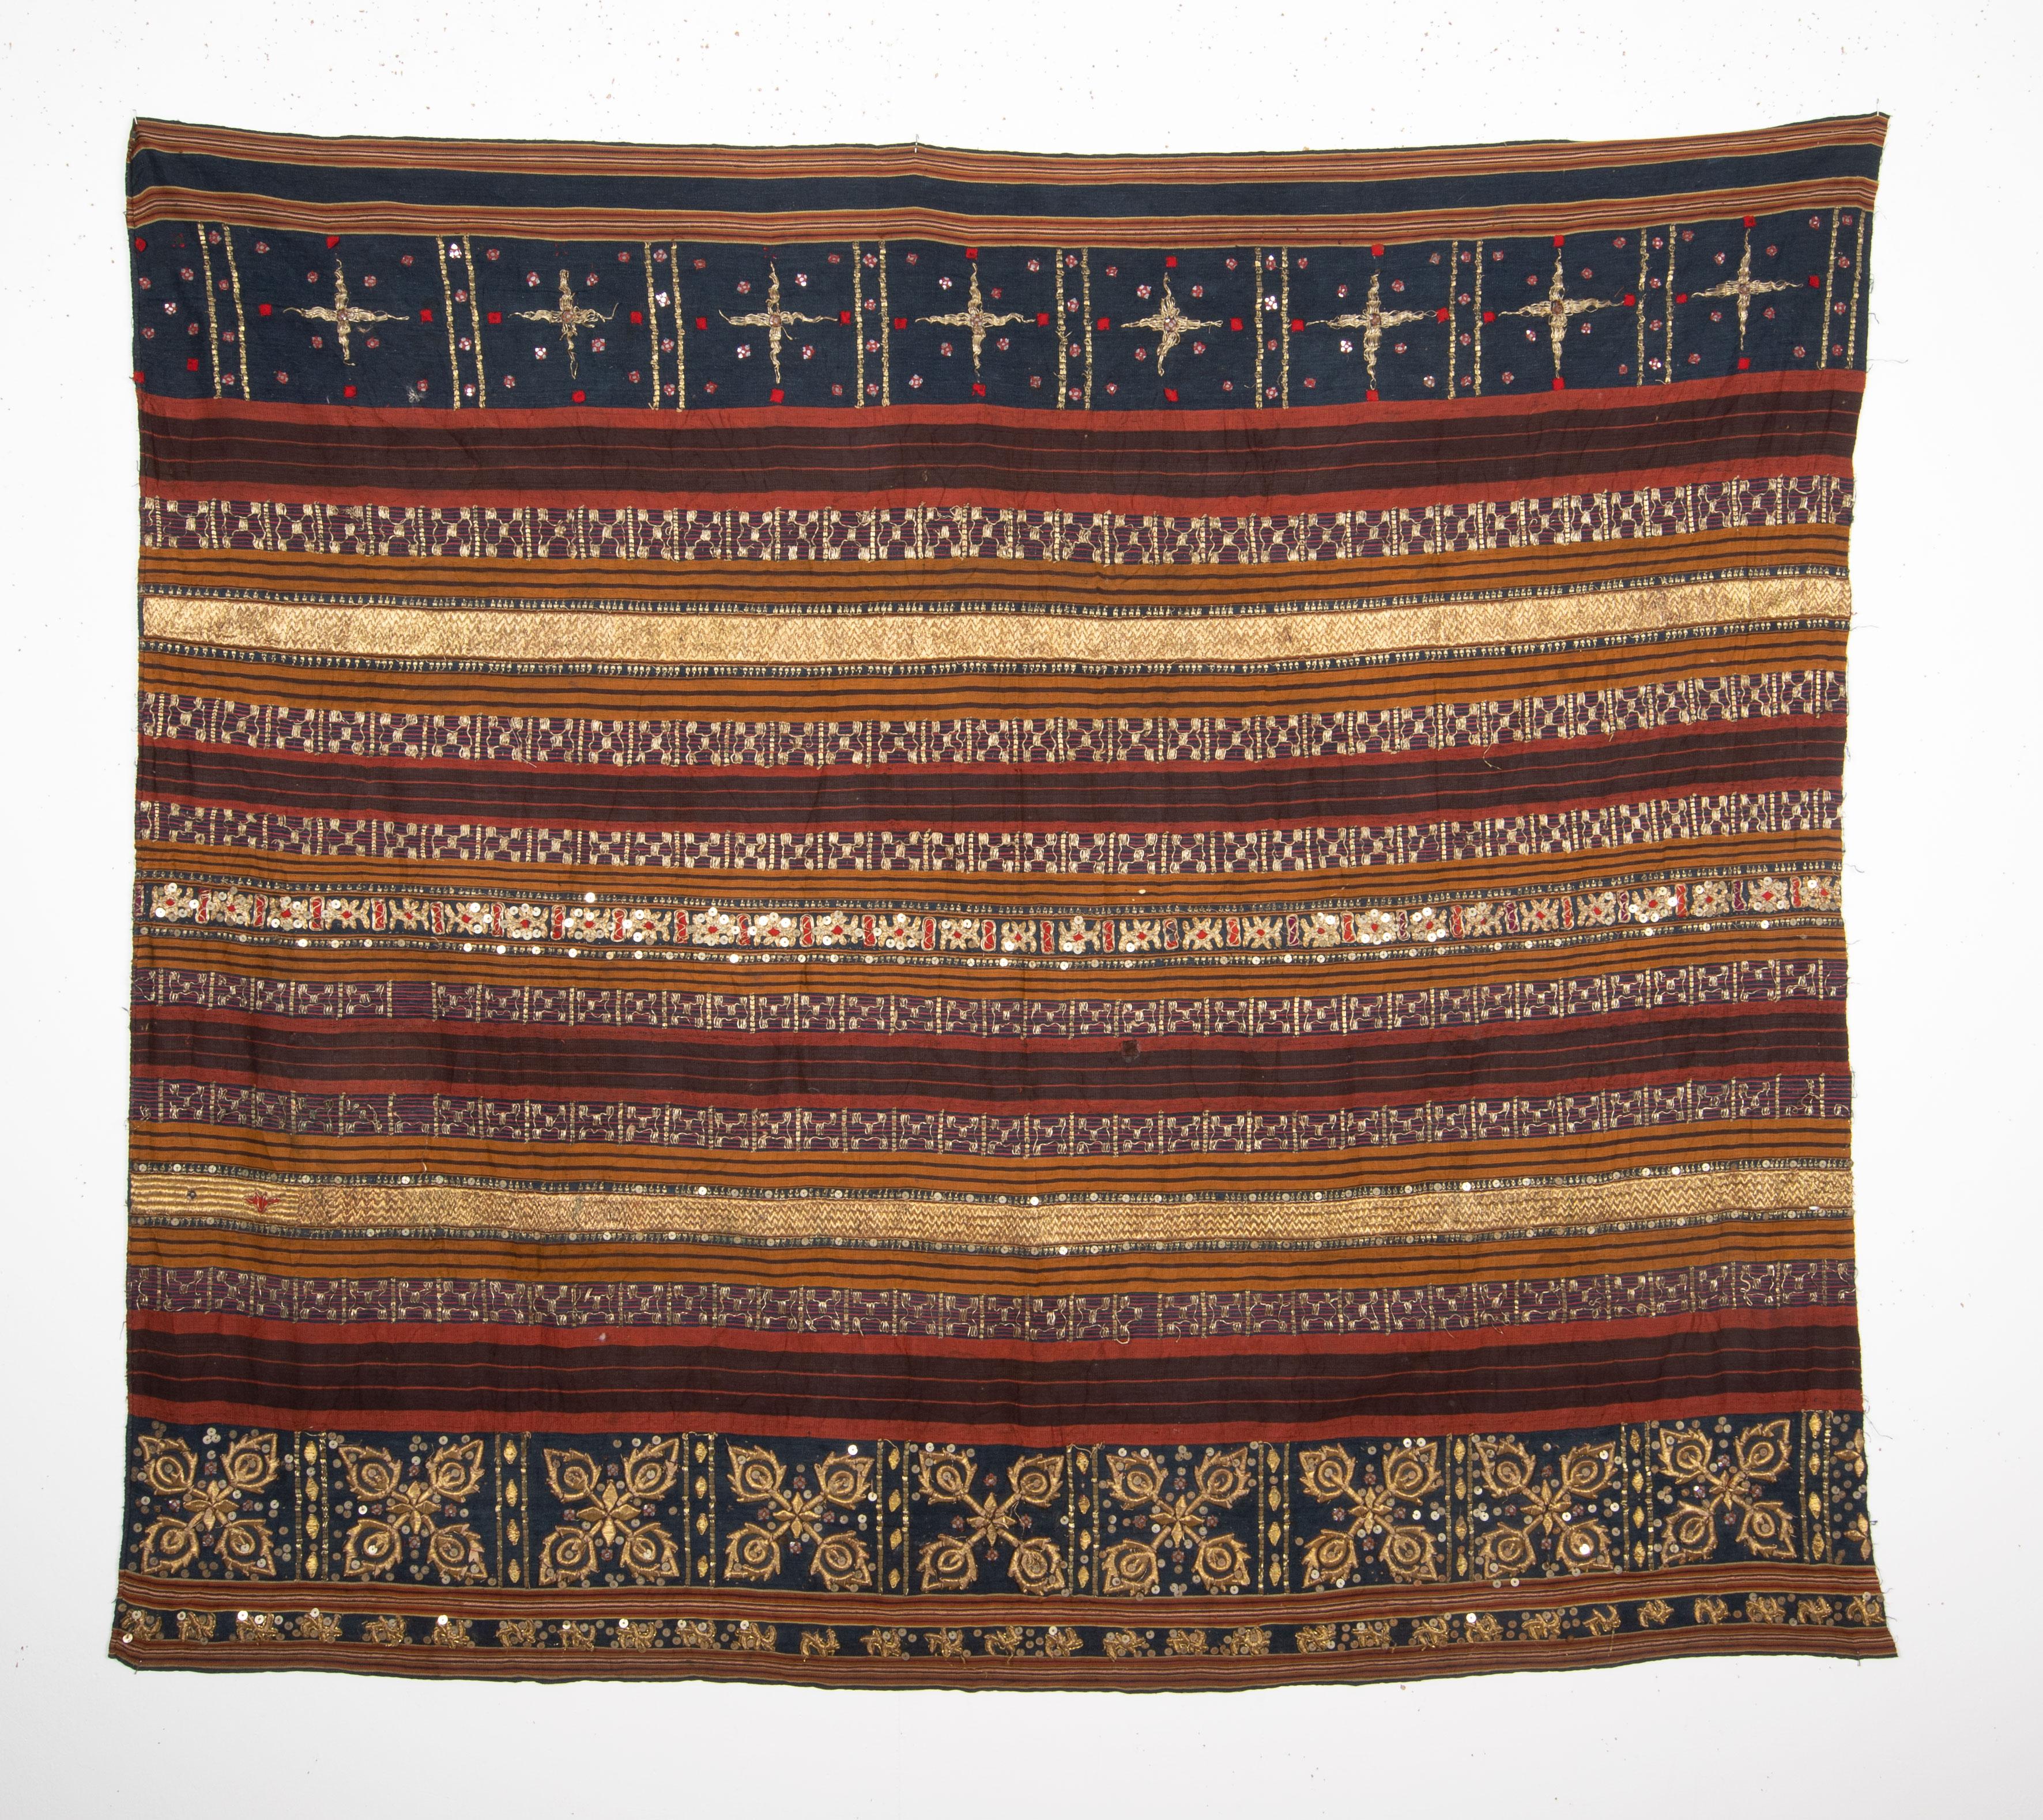 The piece is in rather good condition, embroidered with traditional design elements and materials.